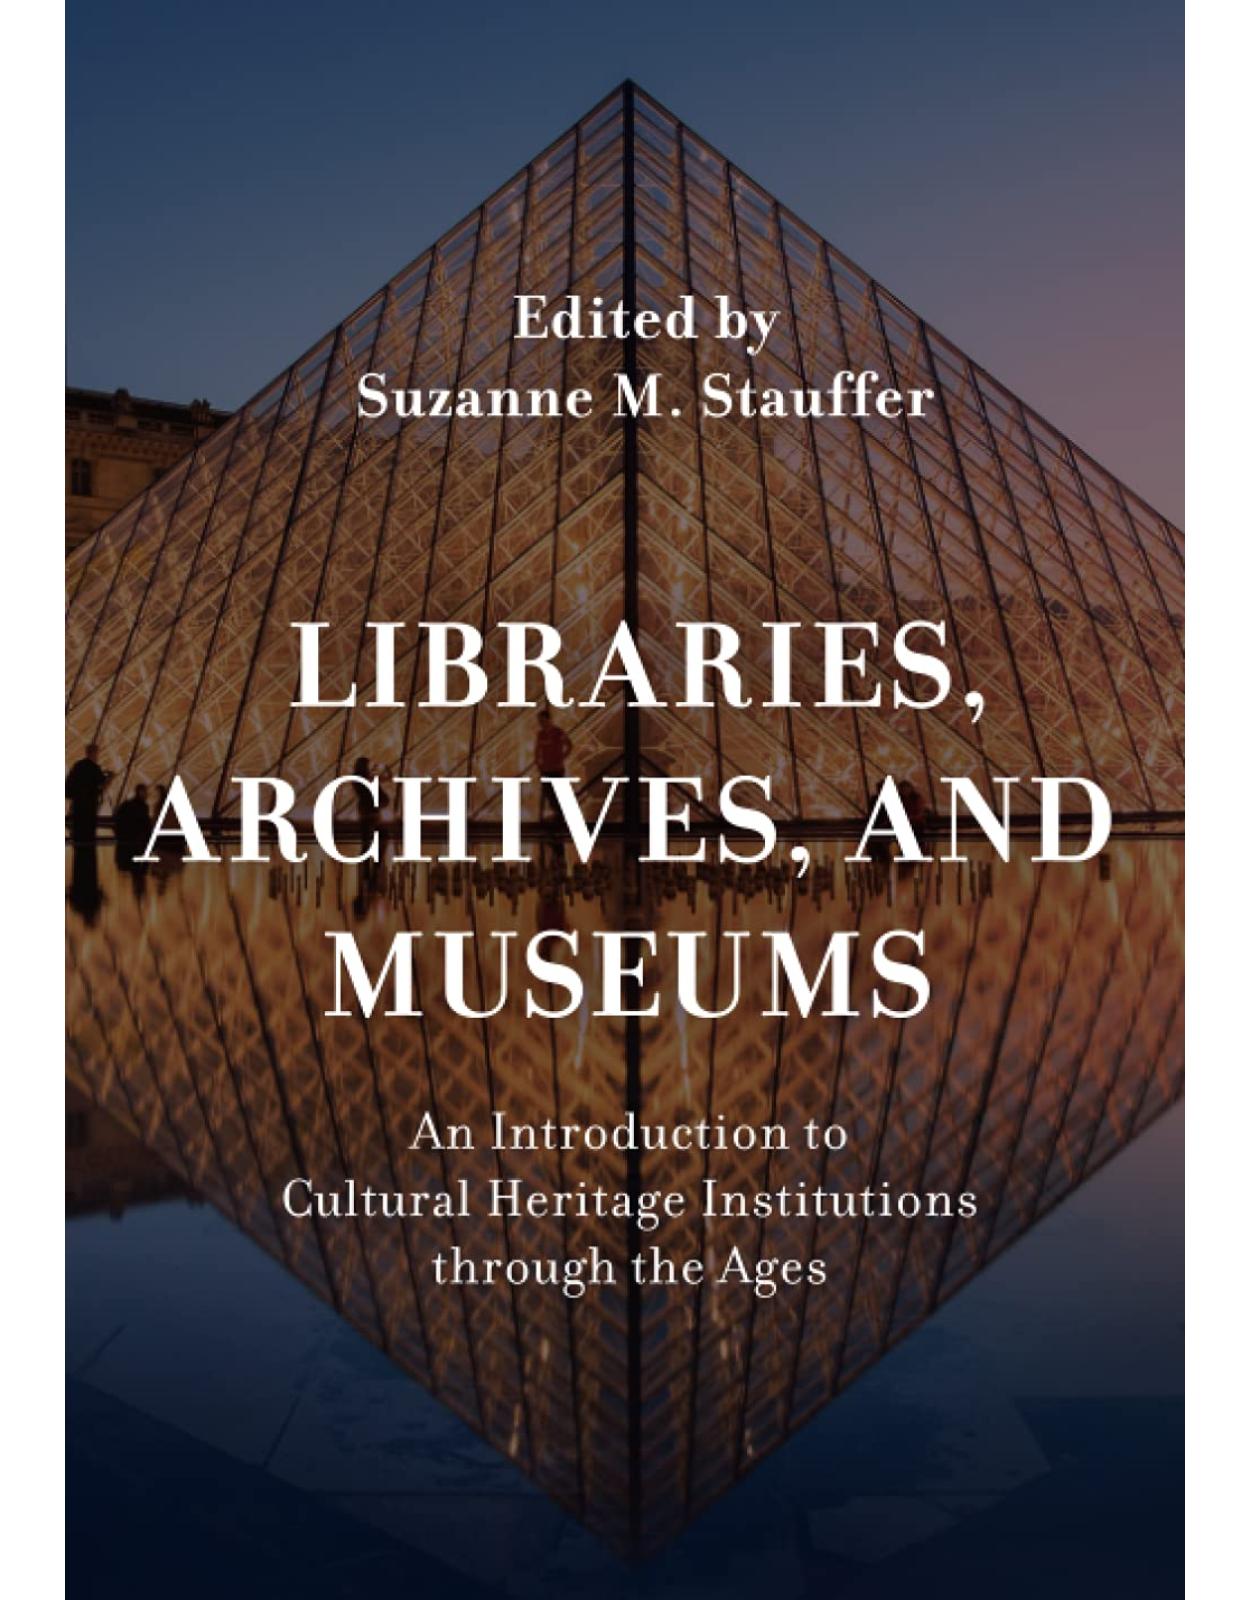 Libraries, Archives, and Museums: An Introduction to Cultural Heritage Institutions through the Ages